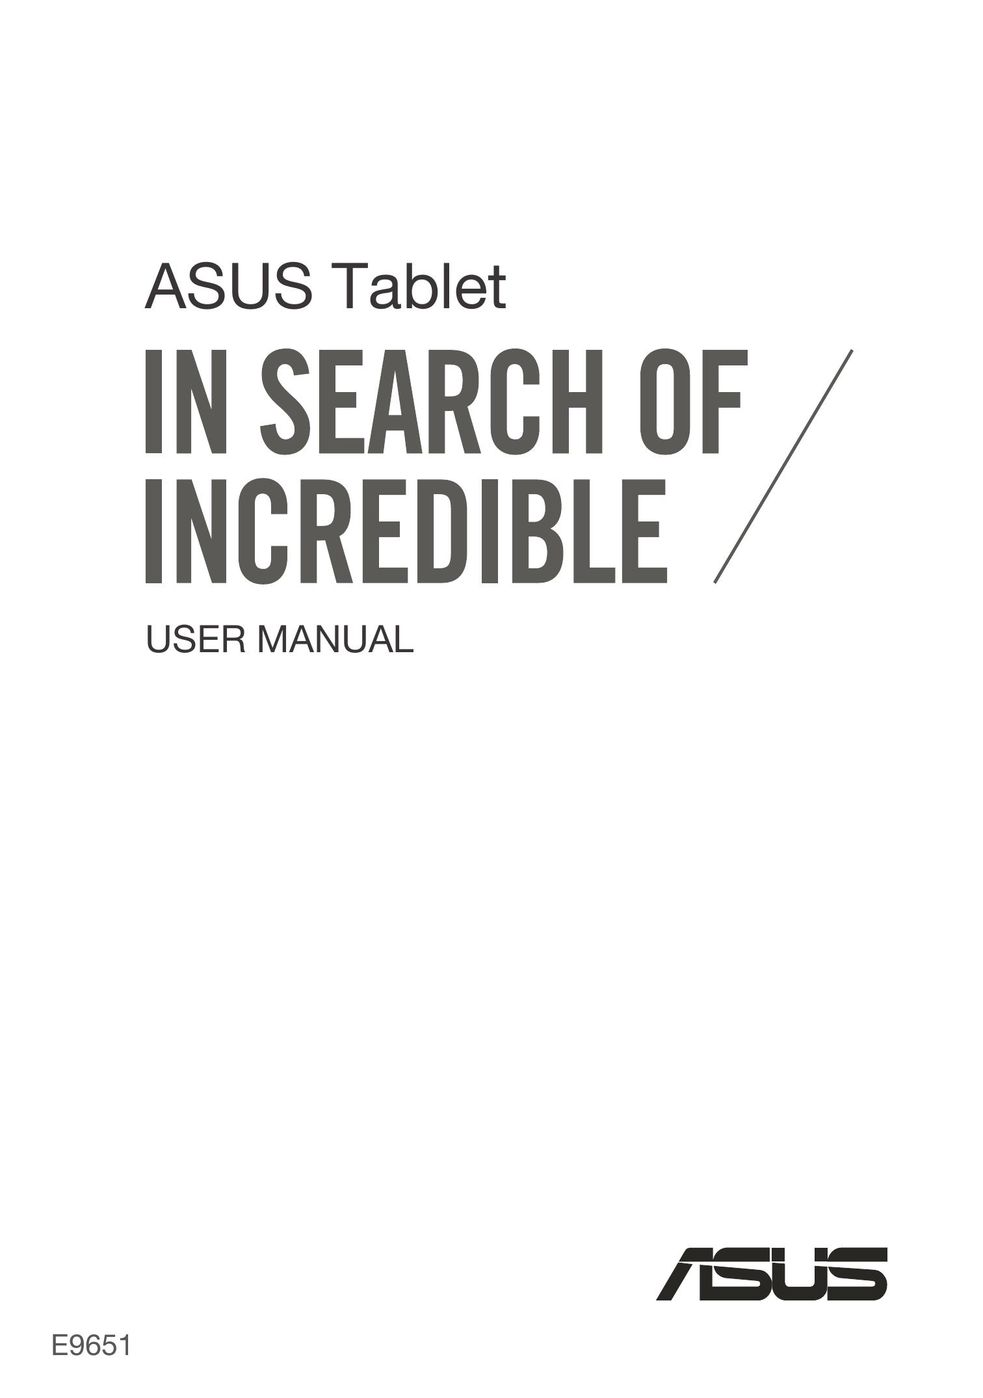 Asus E9651 Graphics Tablet User Manual